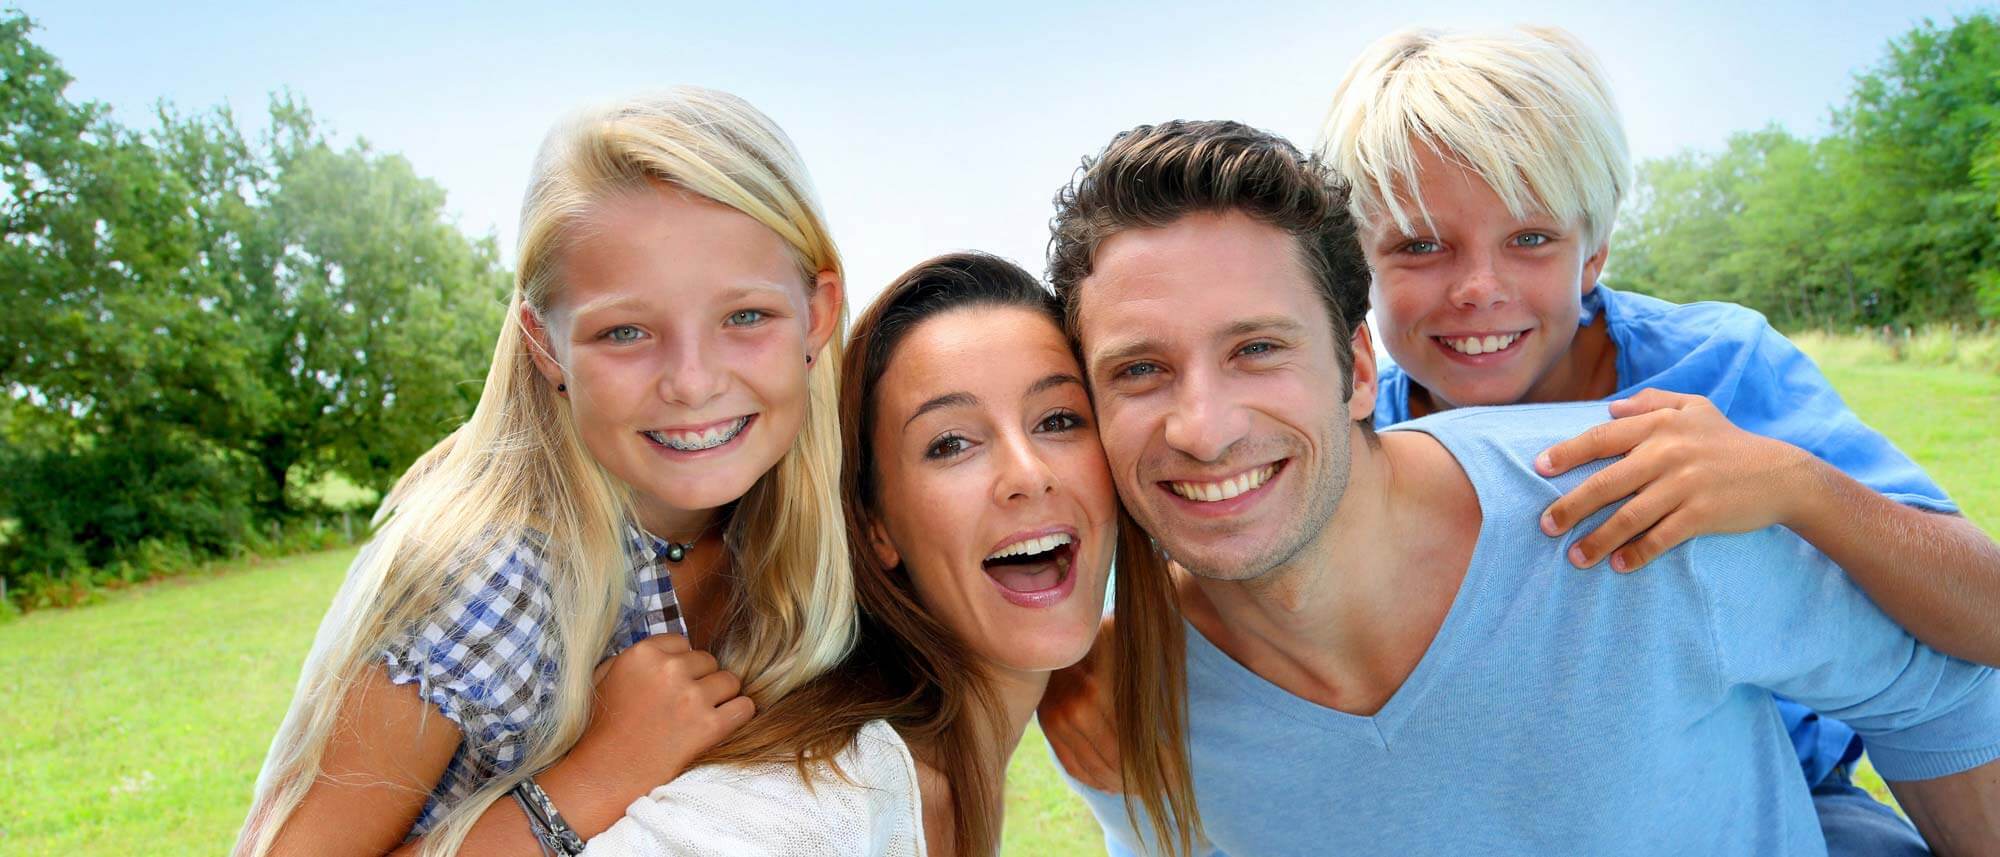 Orthodontist in Eugene and Creswell, OR | Thornton Orthodontics